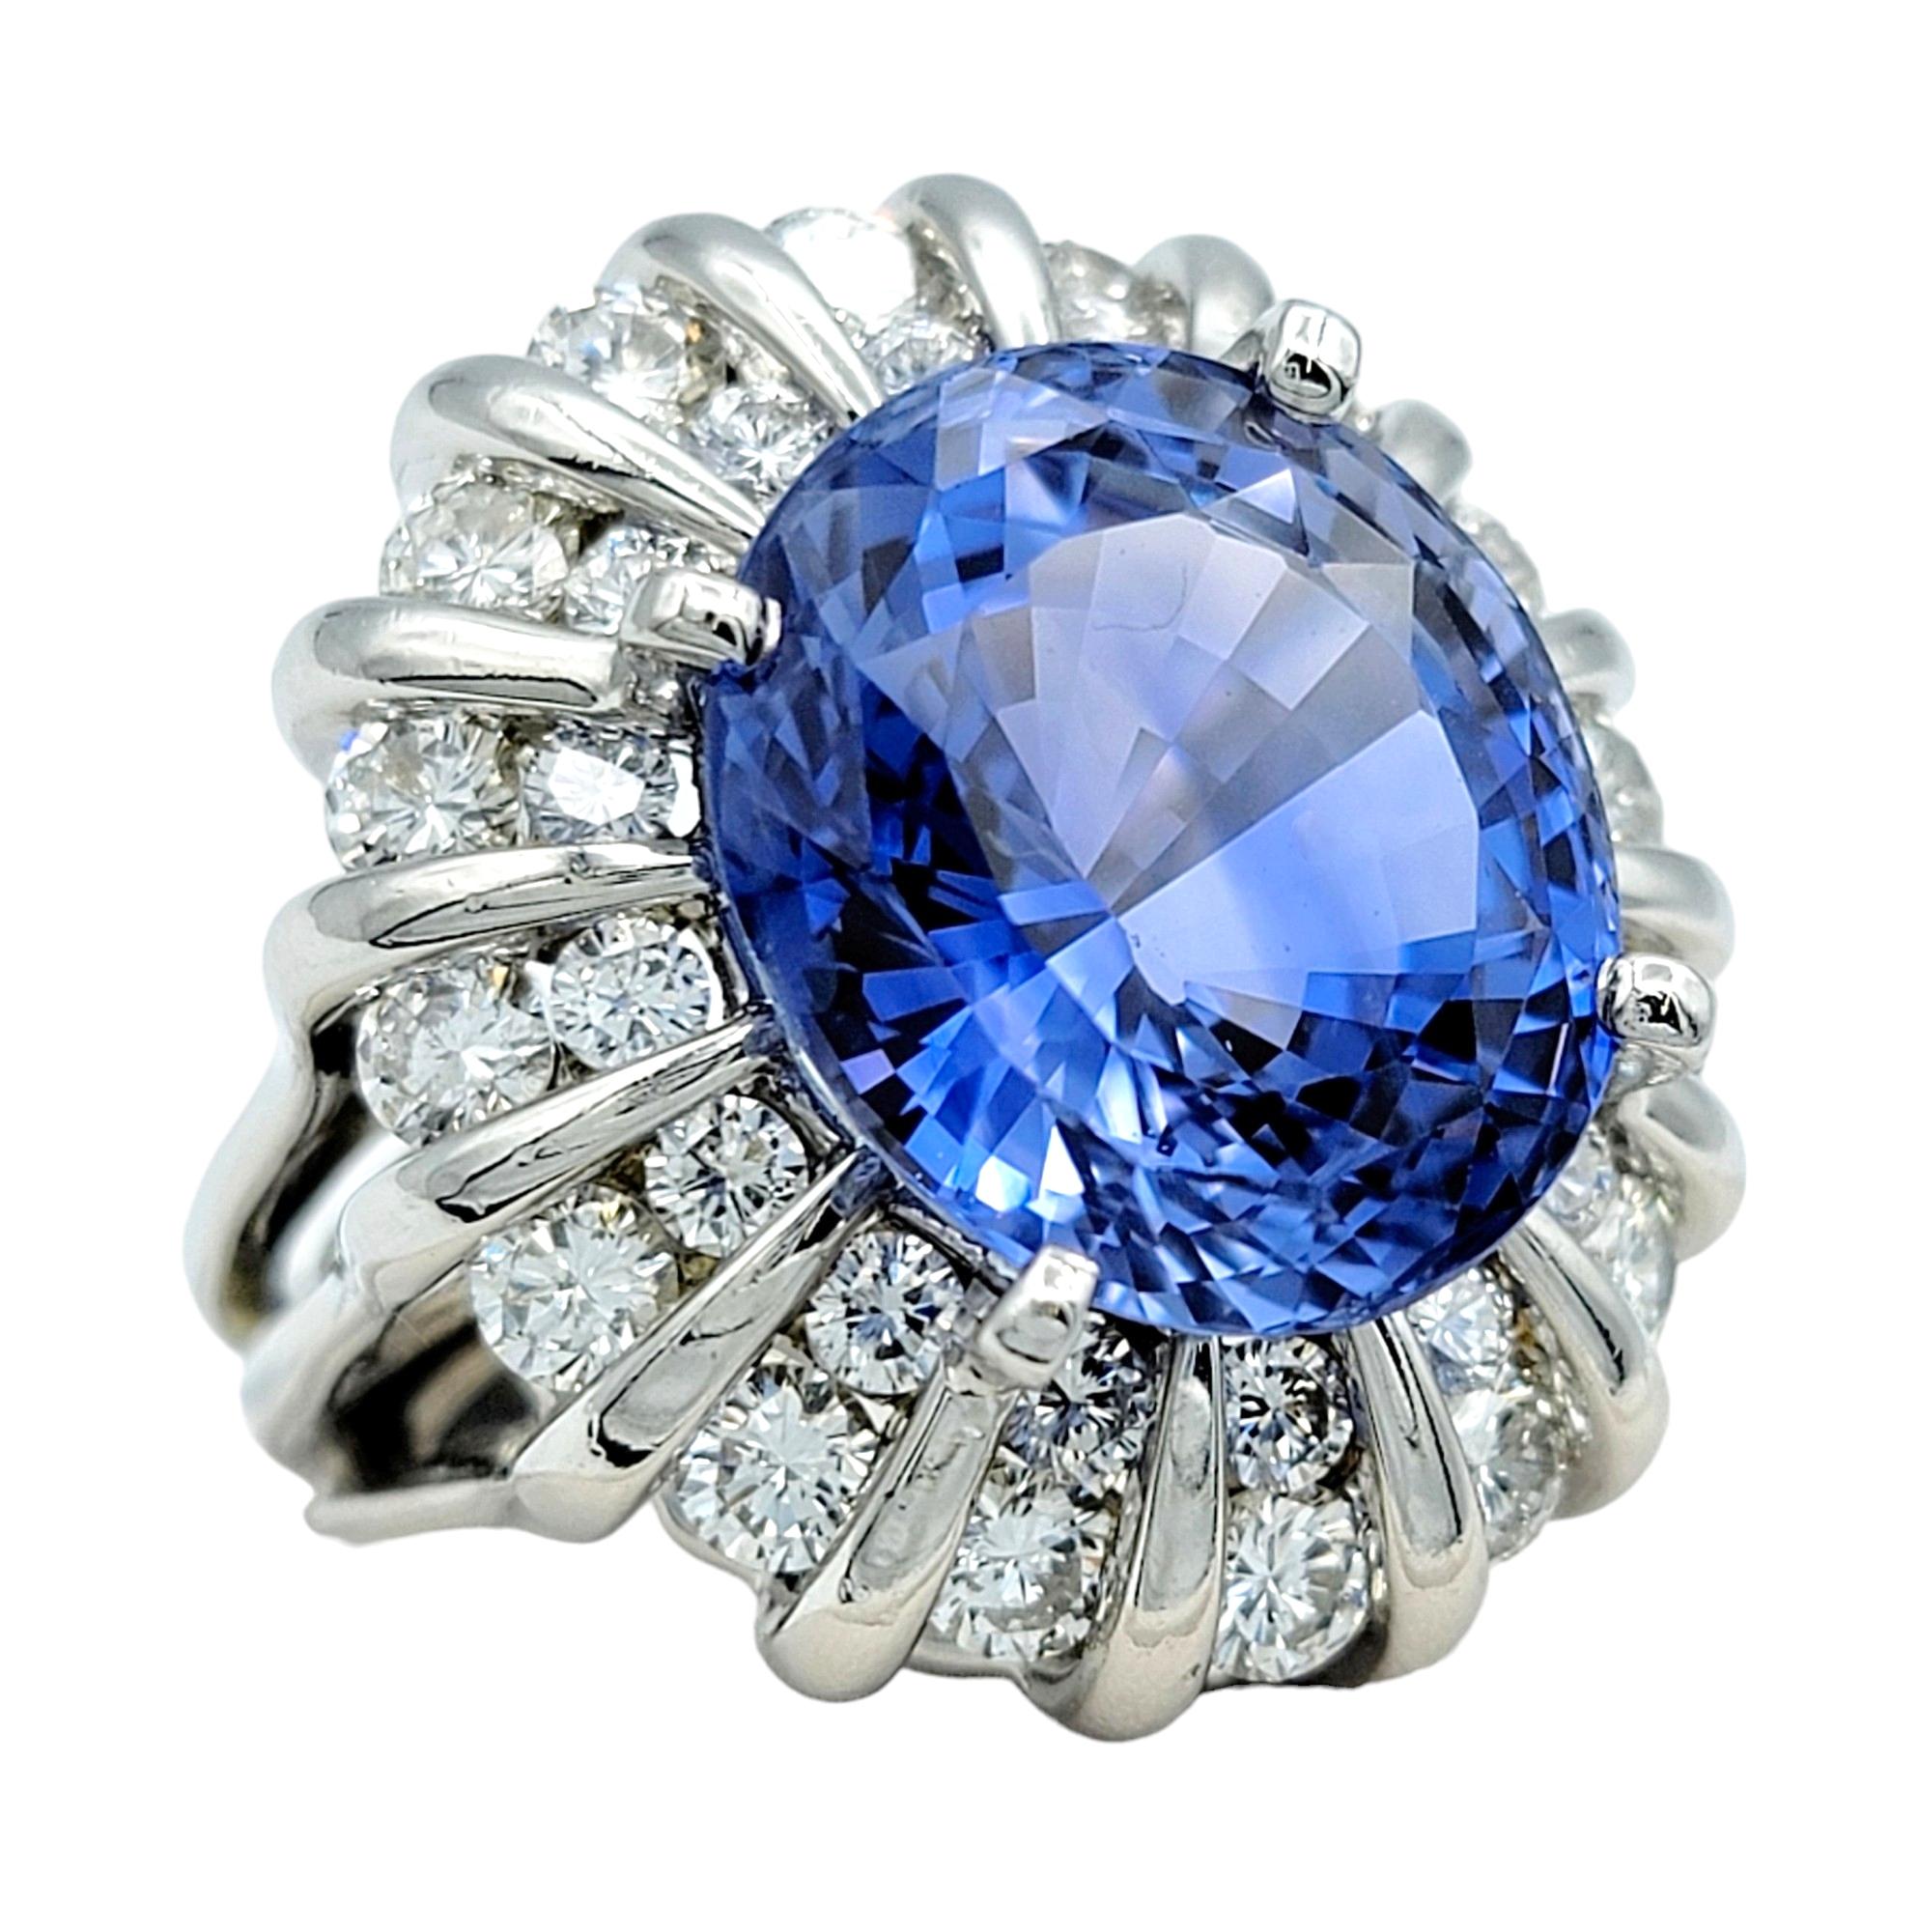 Introducing the epitome of luxury and sophistication, our breathtaking natural Ceylon sapphire and diamond cocktail ring is a true masterpiece. The focal point of this extraordinary piece is a mesmerizing 16.27-carat oval cut Ceylon sapphire,